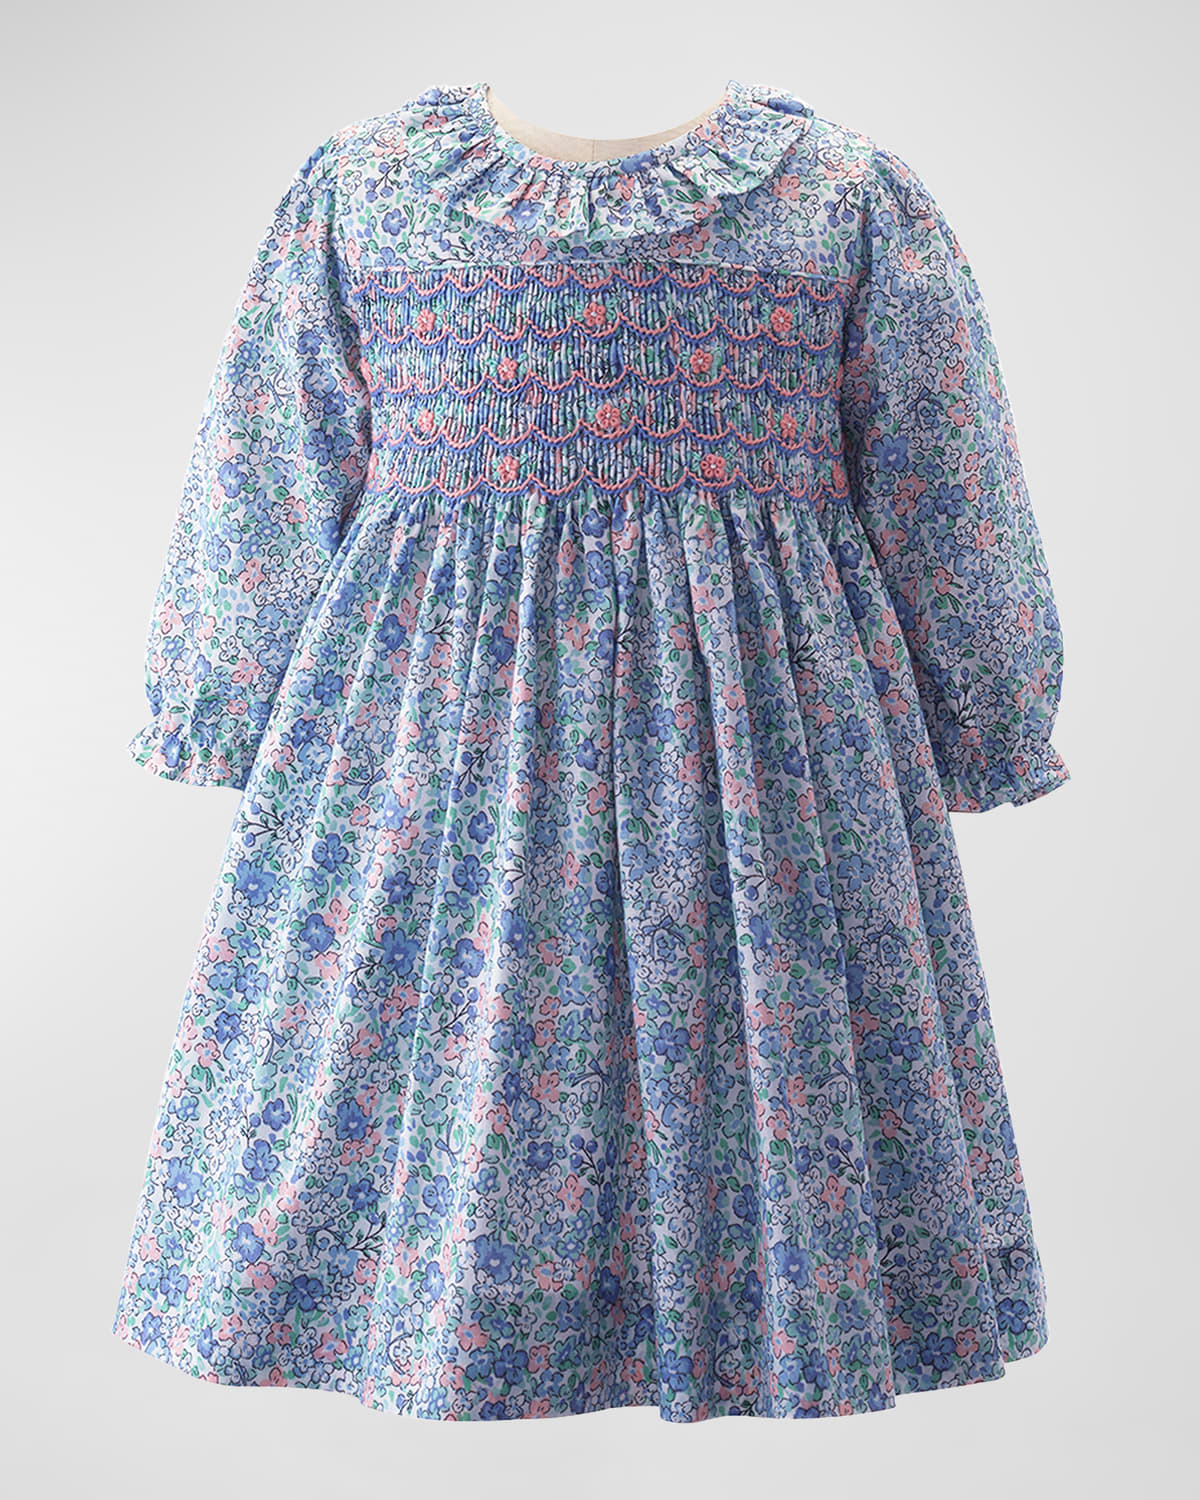 Girl's Floral-Print Smocked Dress w/ Bloomers, Size 6M-24M